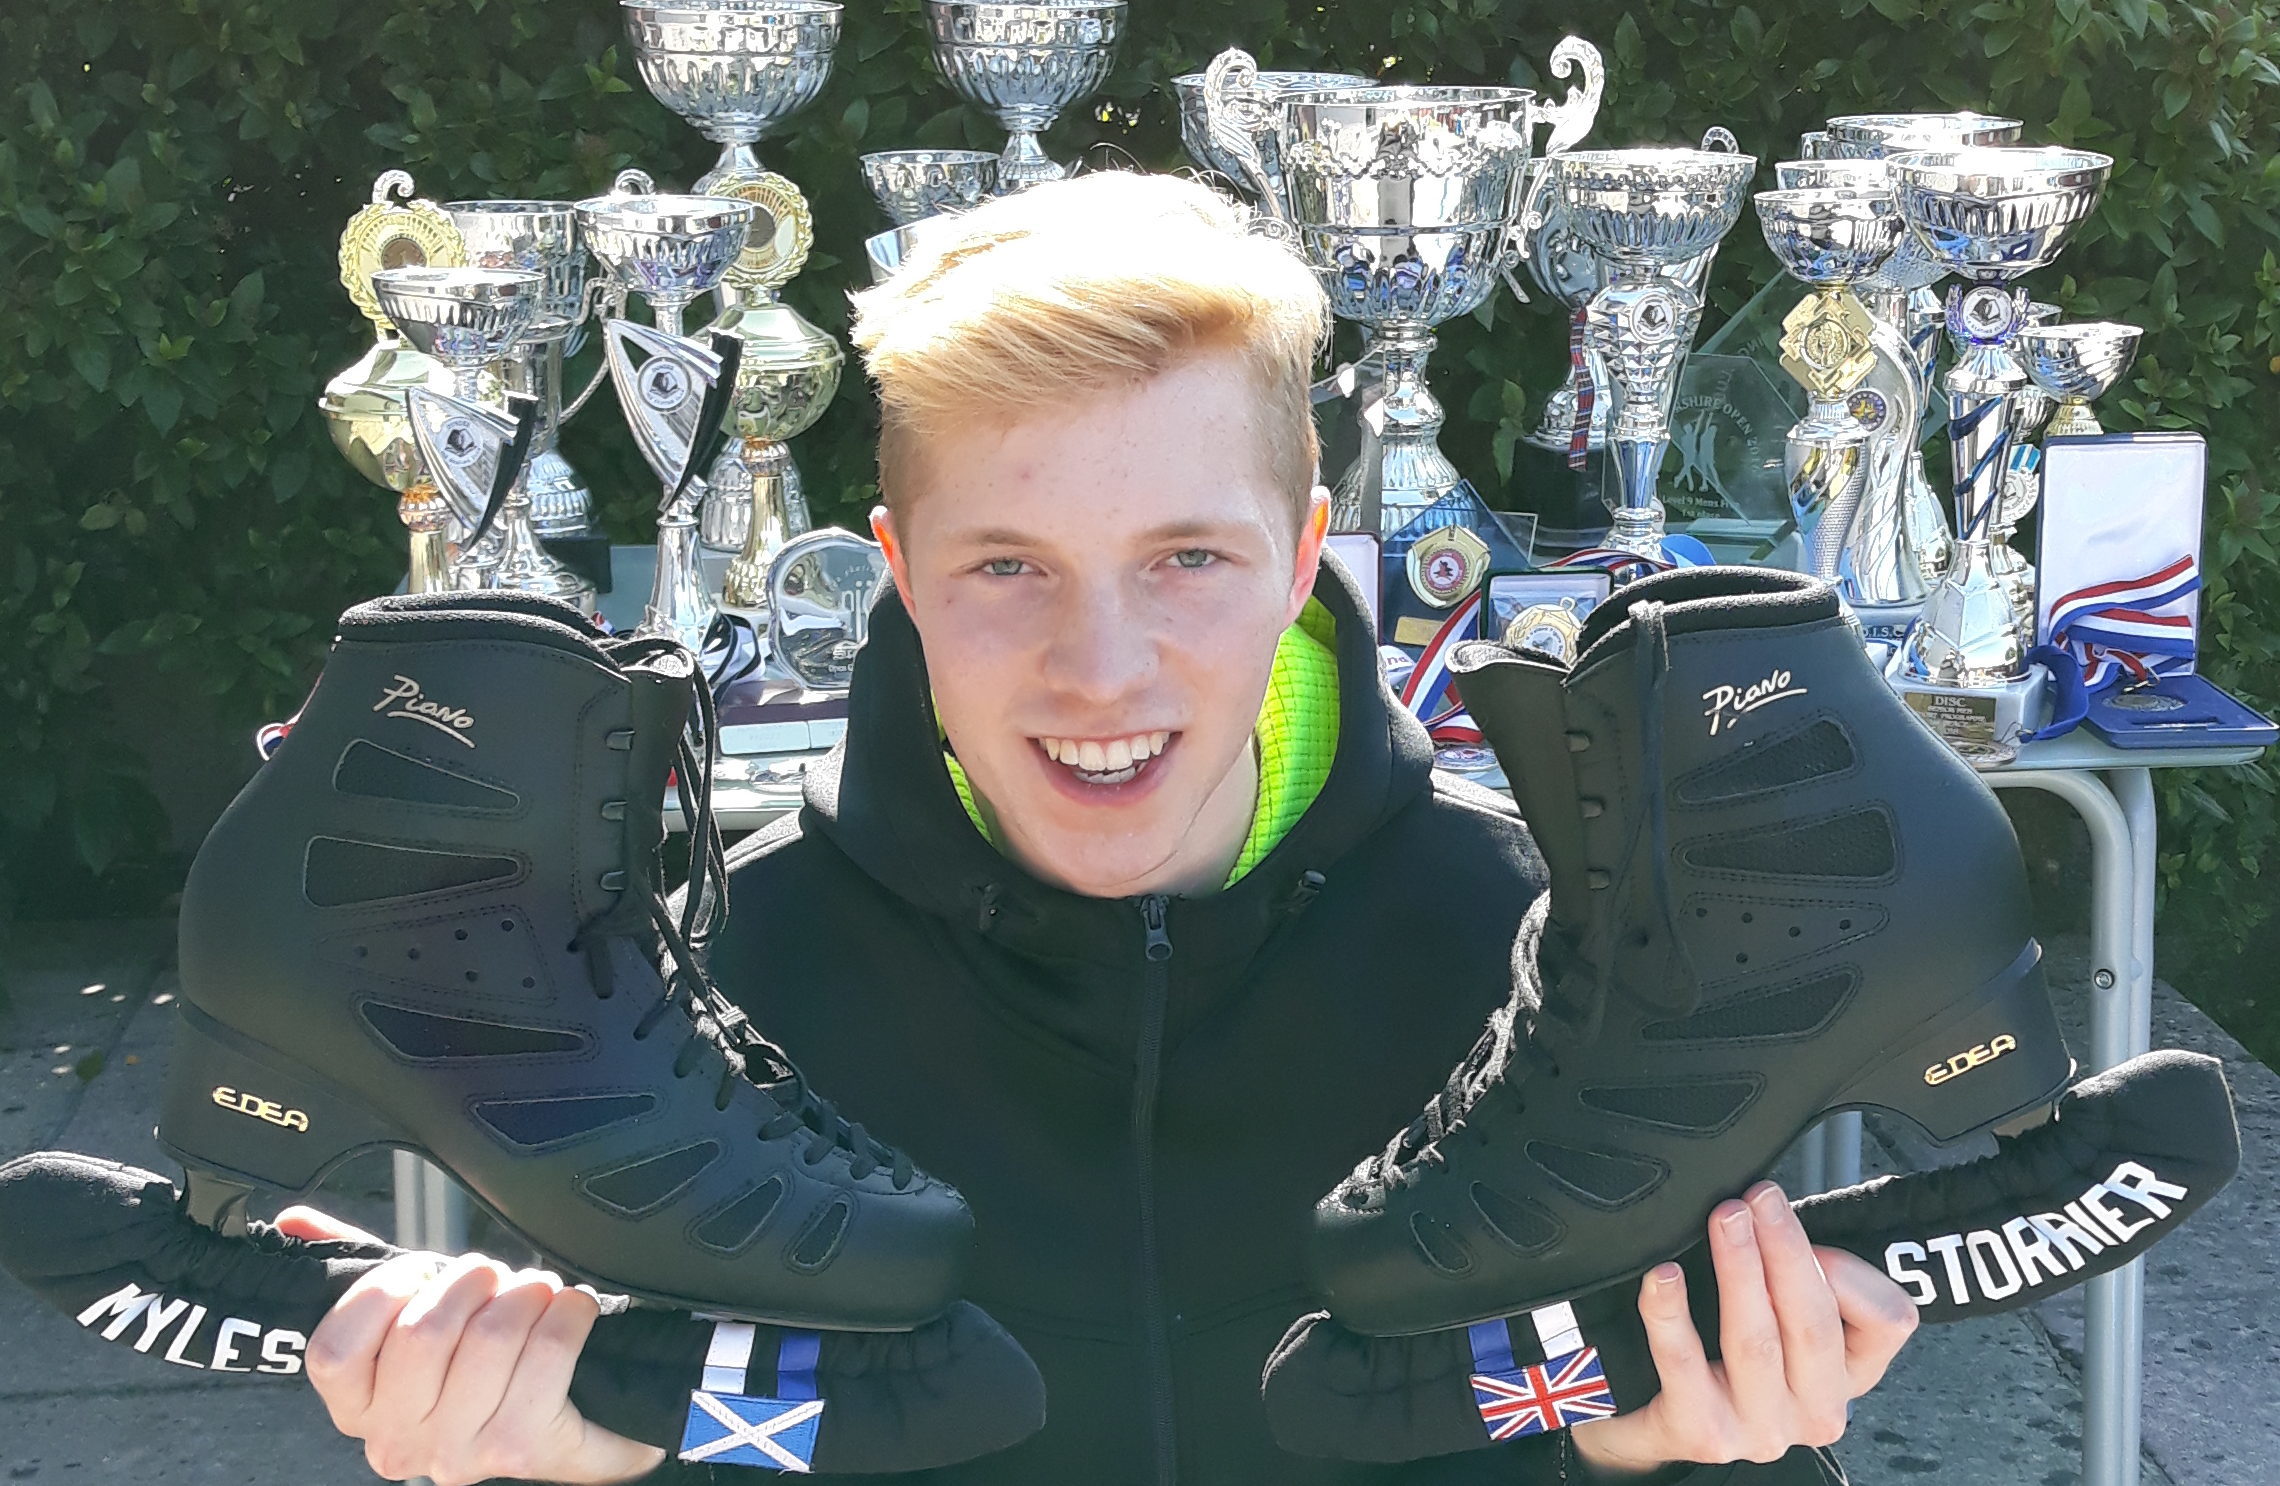 Myles Storrier with his skates and trophies.